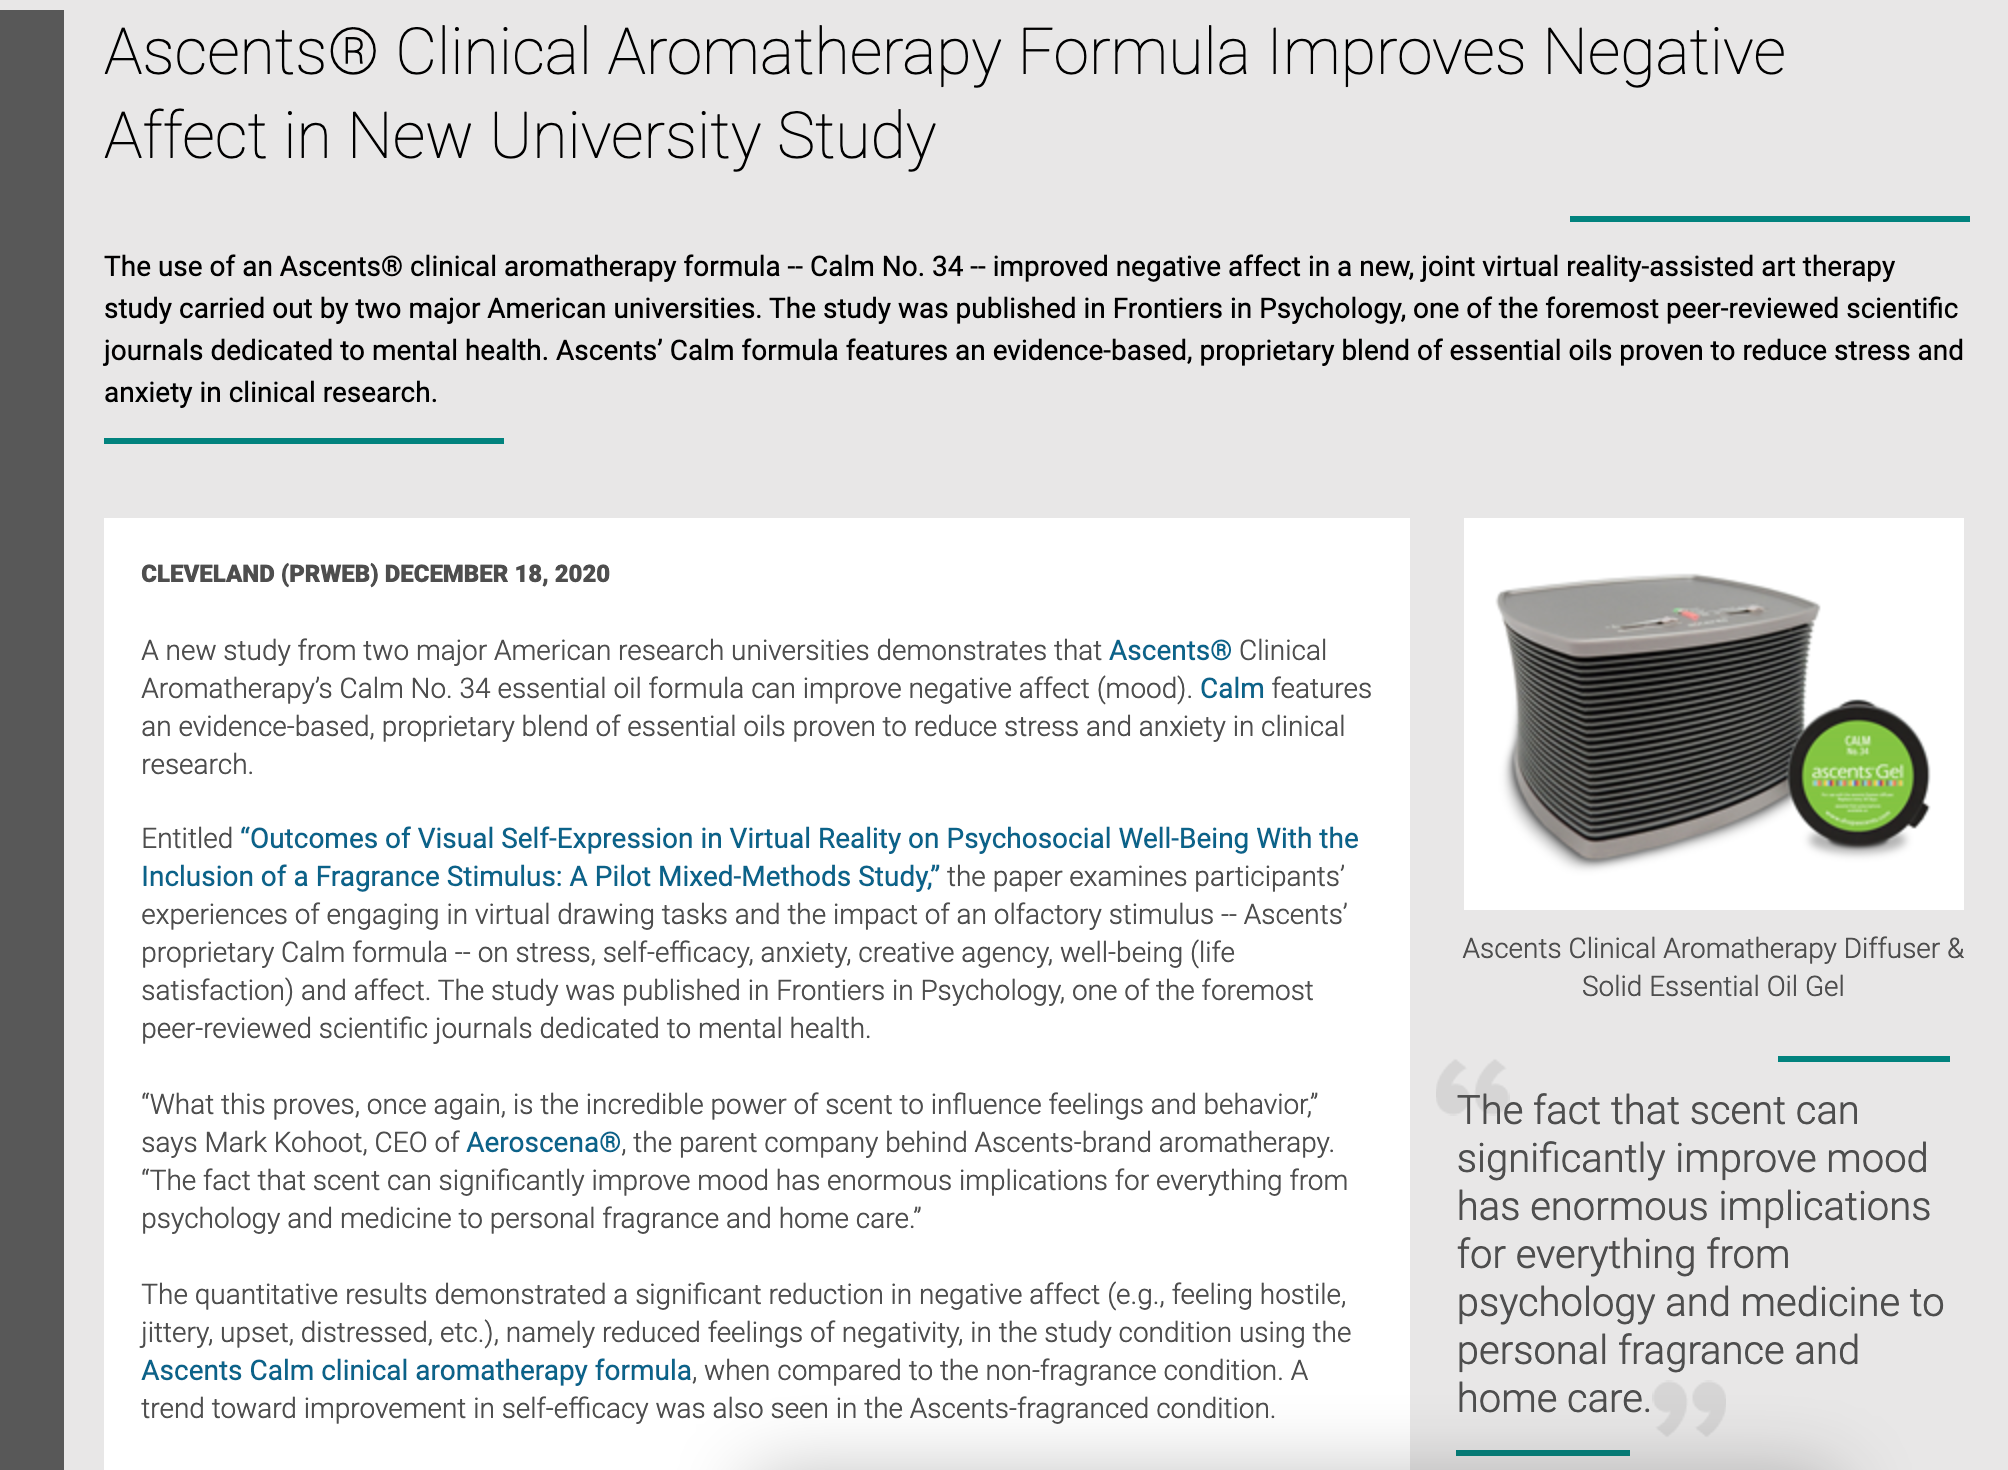 Ascents® Clinical Aromatherapy Formula Improves Negative Affect in New, Joint University Study